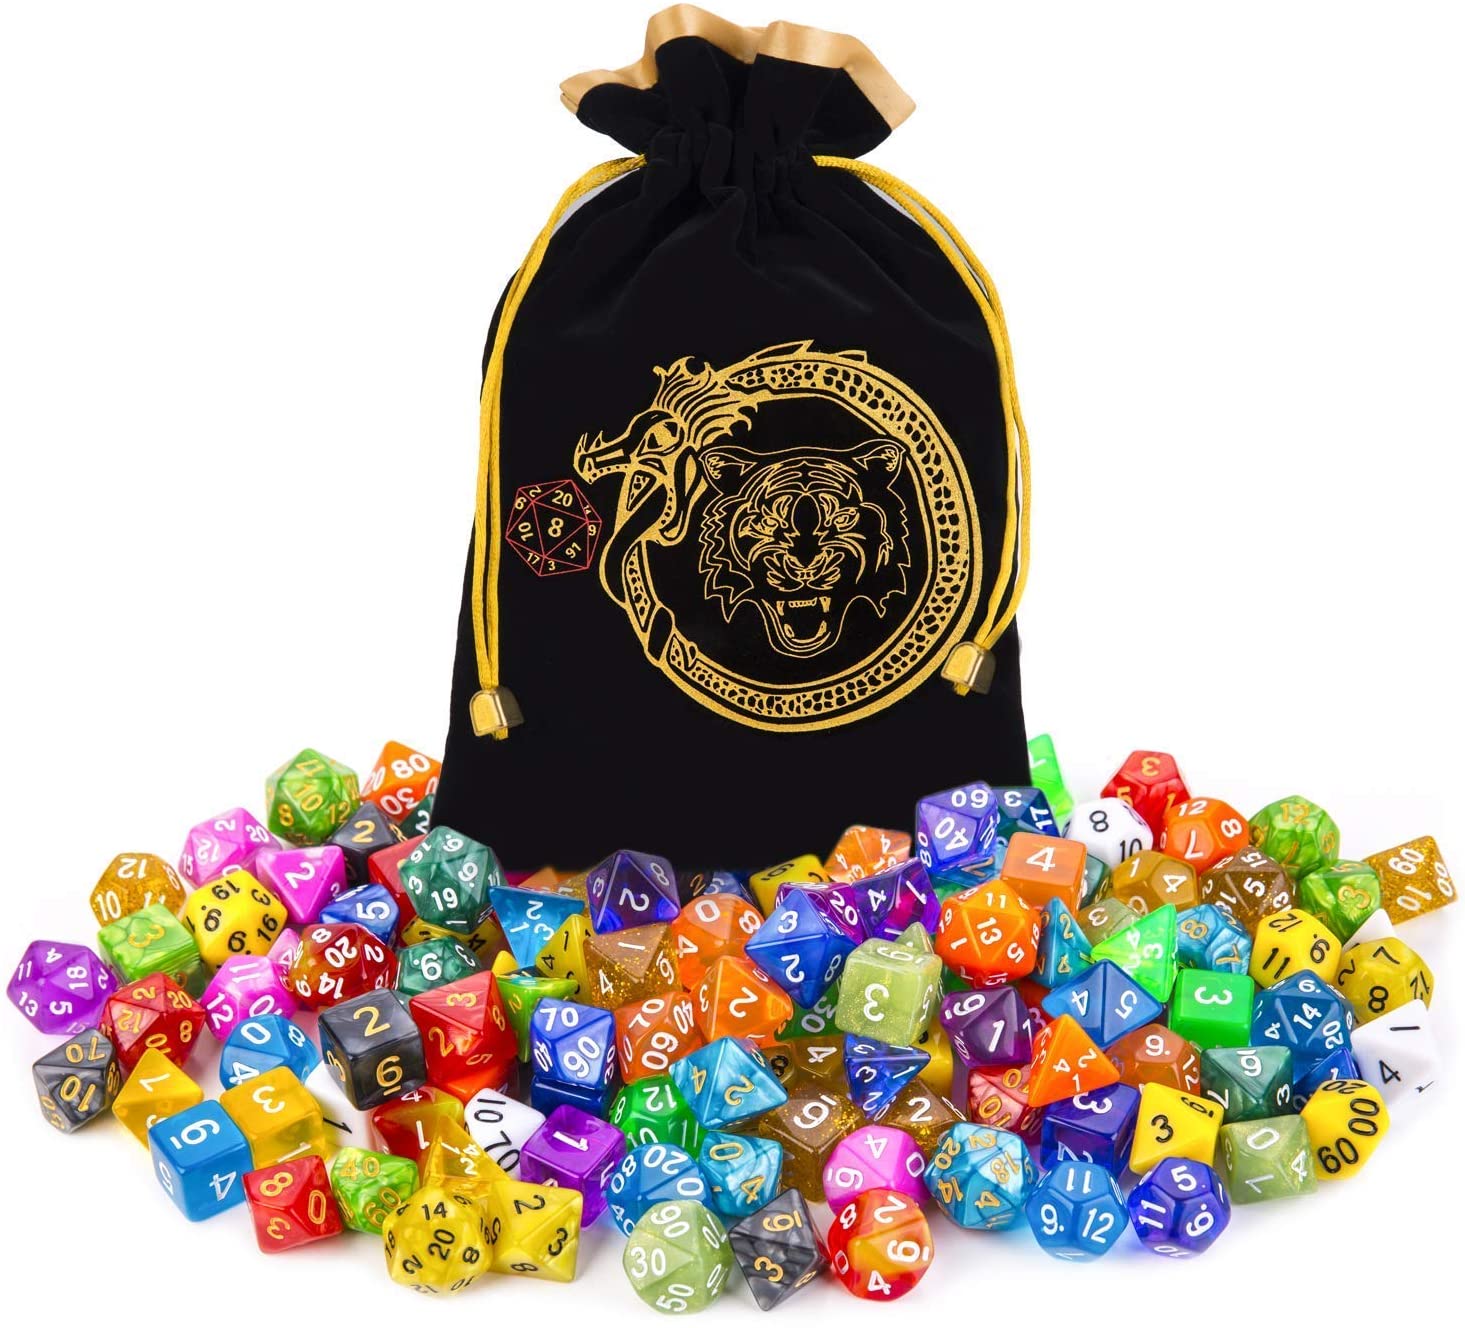 DND Dice Set, 140PCS Polyhedral Game Dice, 20 Set Double Color DND Role Playing Dice with 1 Big Pouch for Dungeon and Dragons DND RPG MTG Table Games Dice D4 D8 D10 D12 D20 …